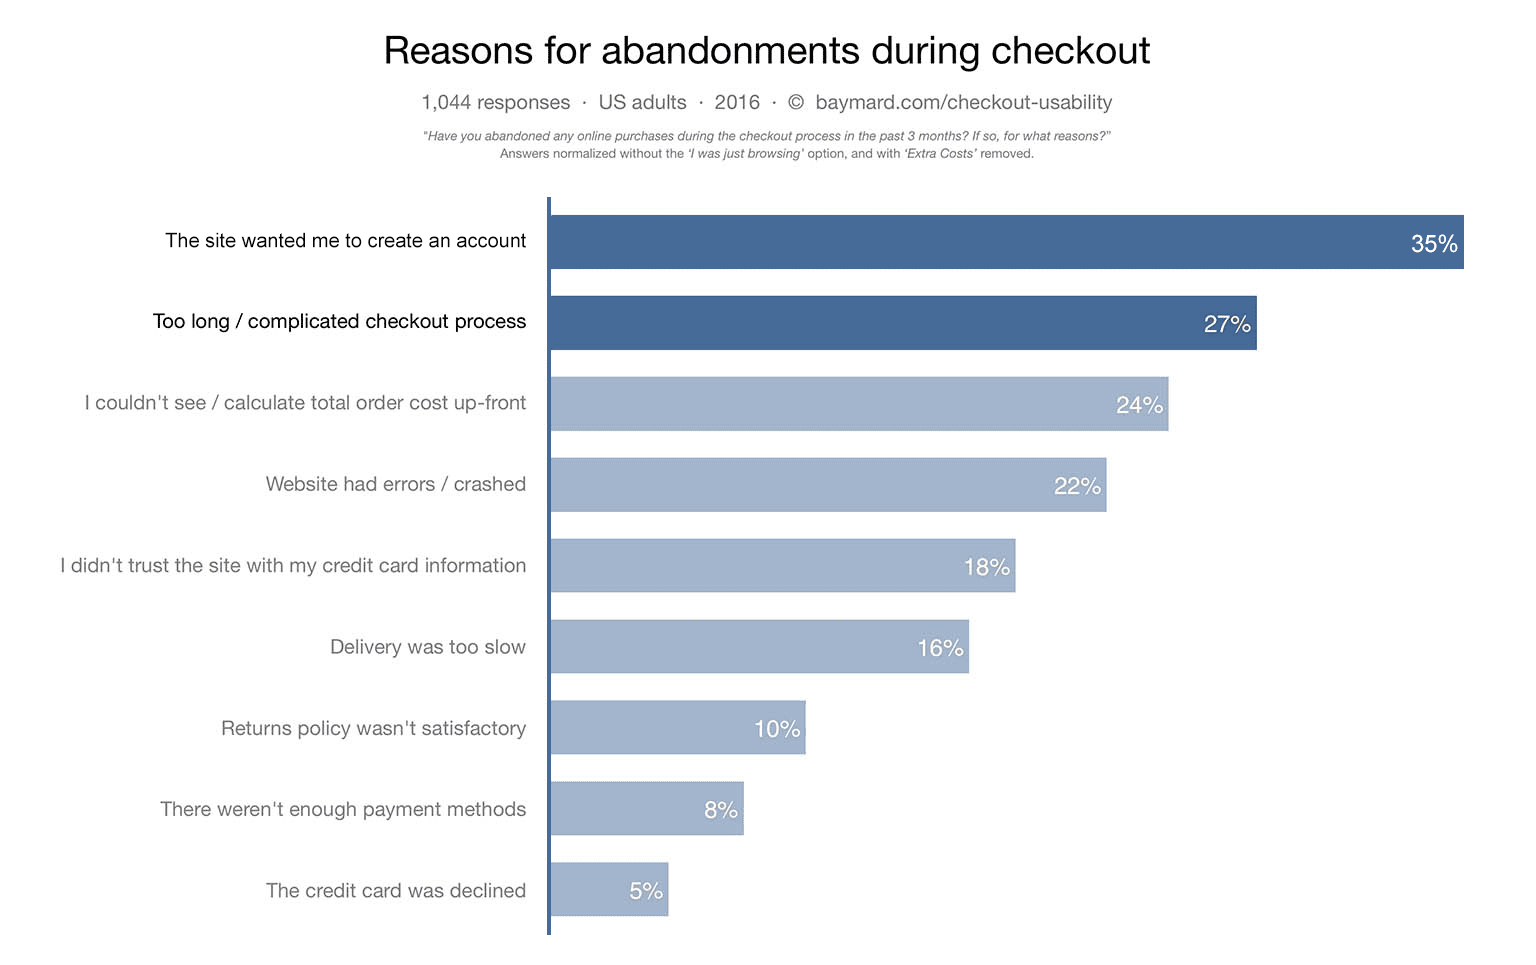 Reasons for shopping cart abandonment during checkout.